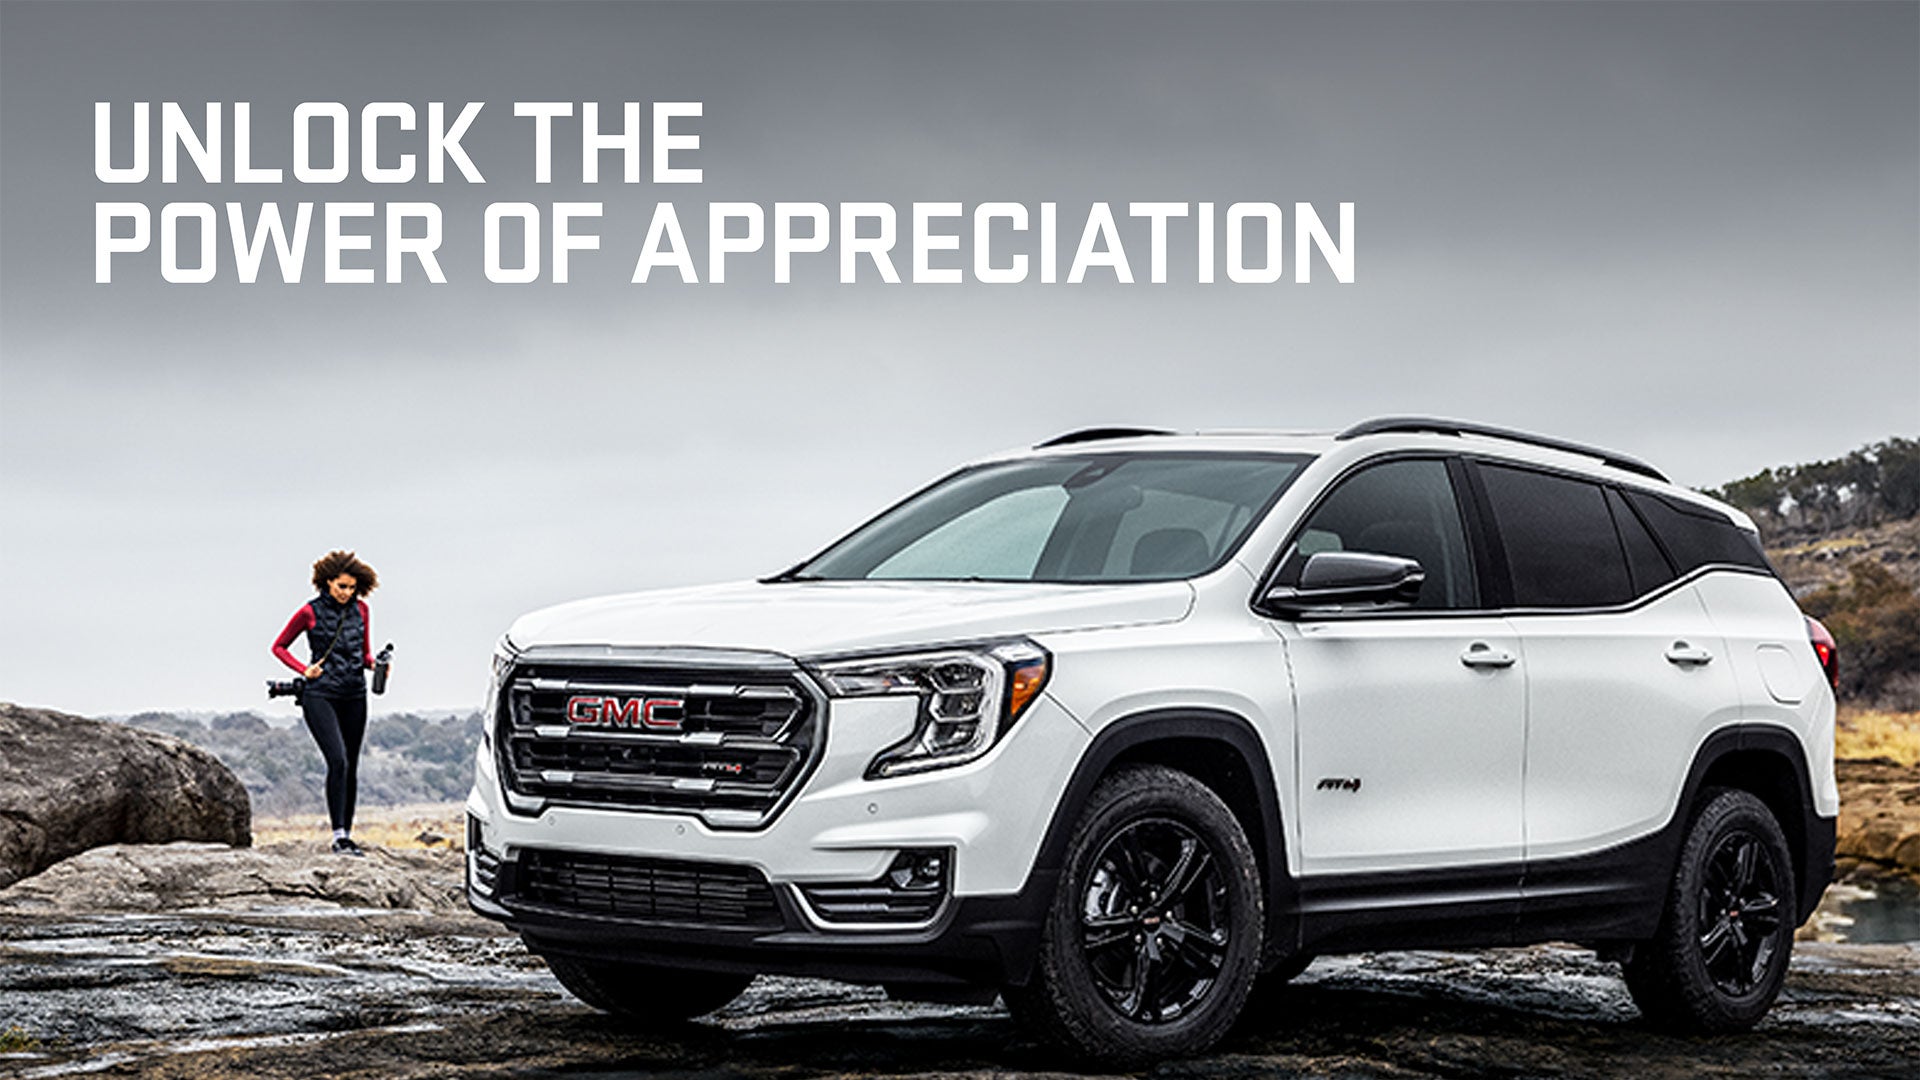 Unlock the power of appreciation | Circle Buick GMC in highland IN